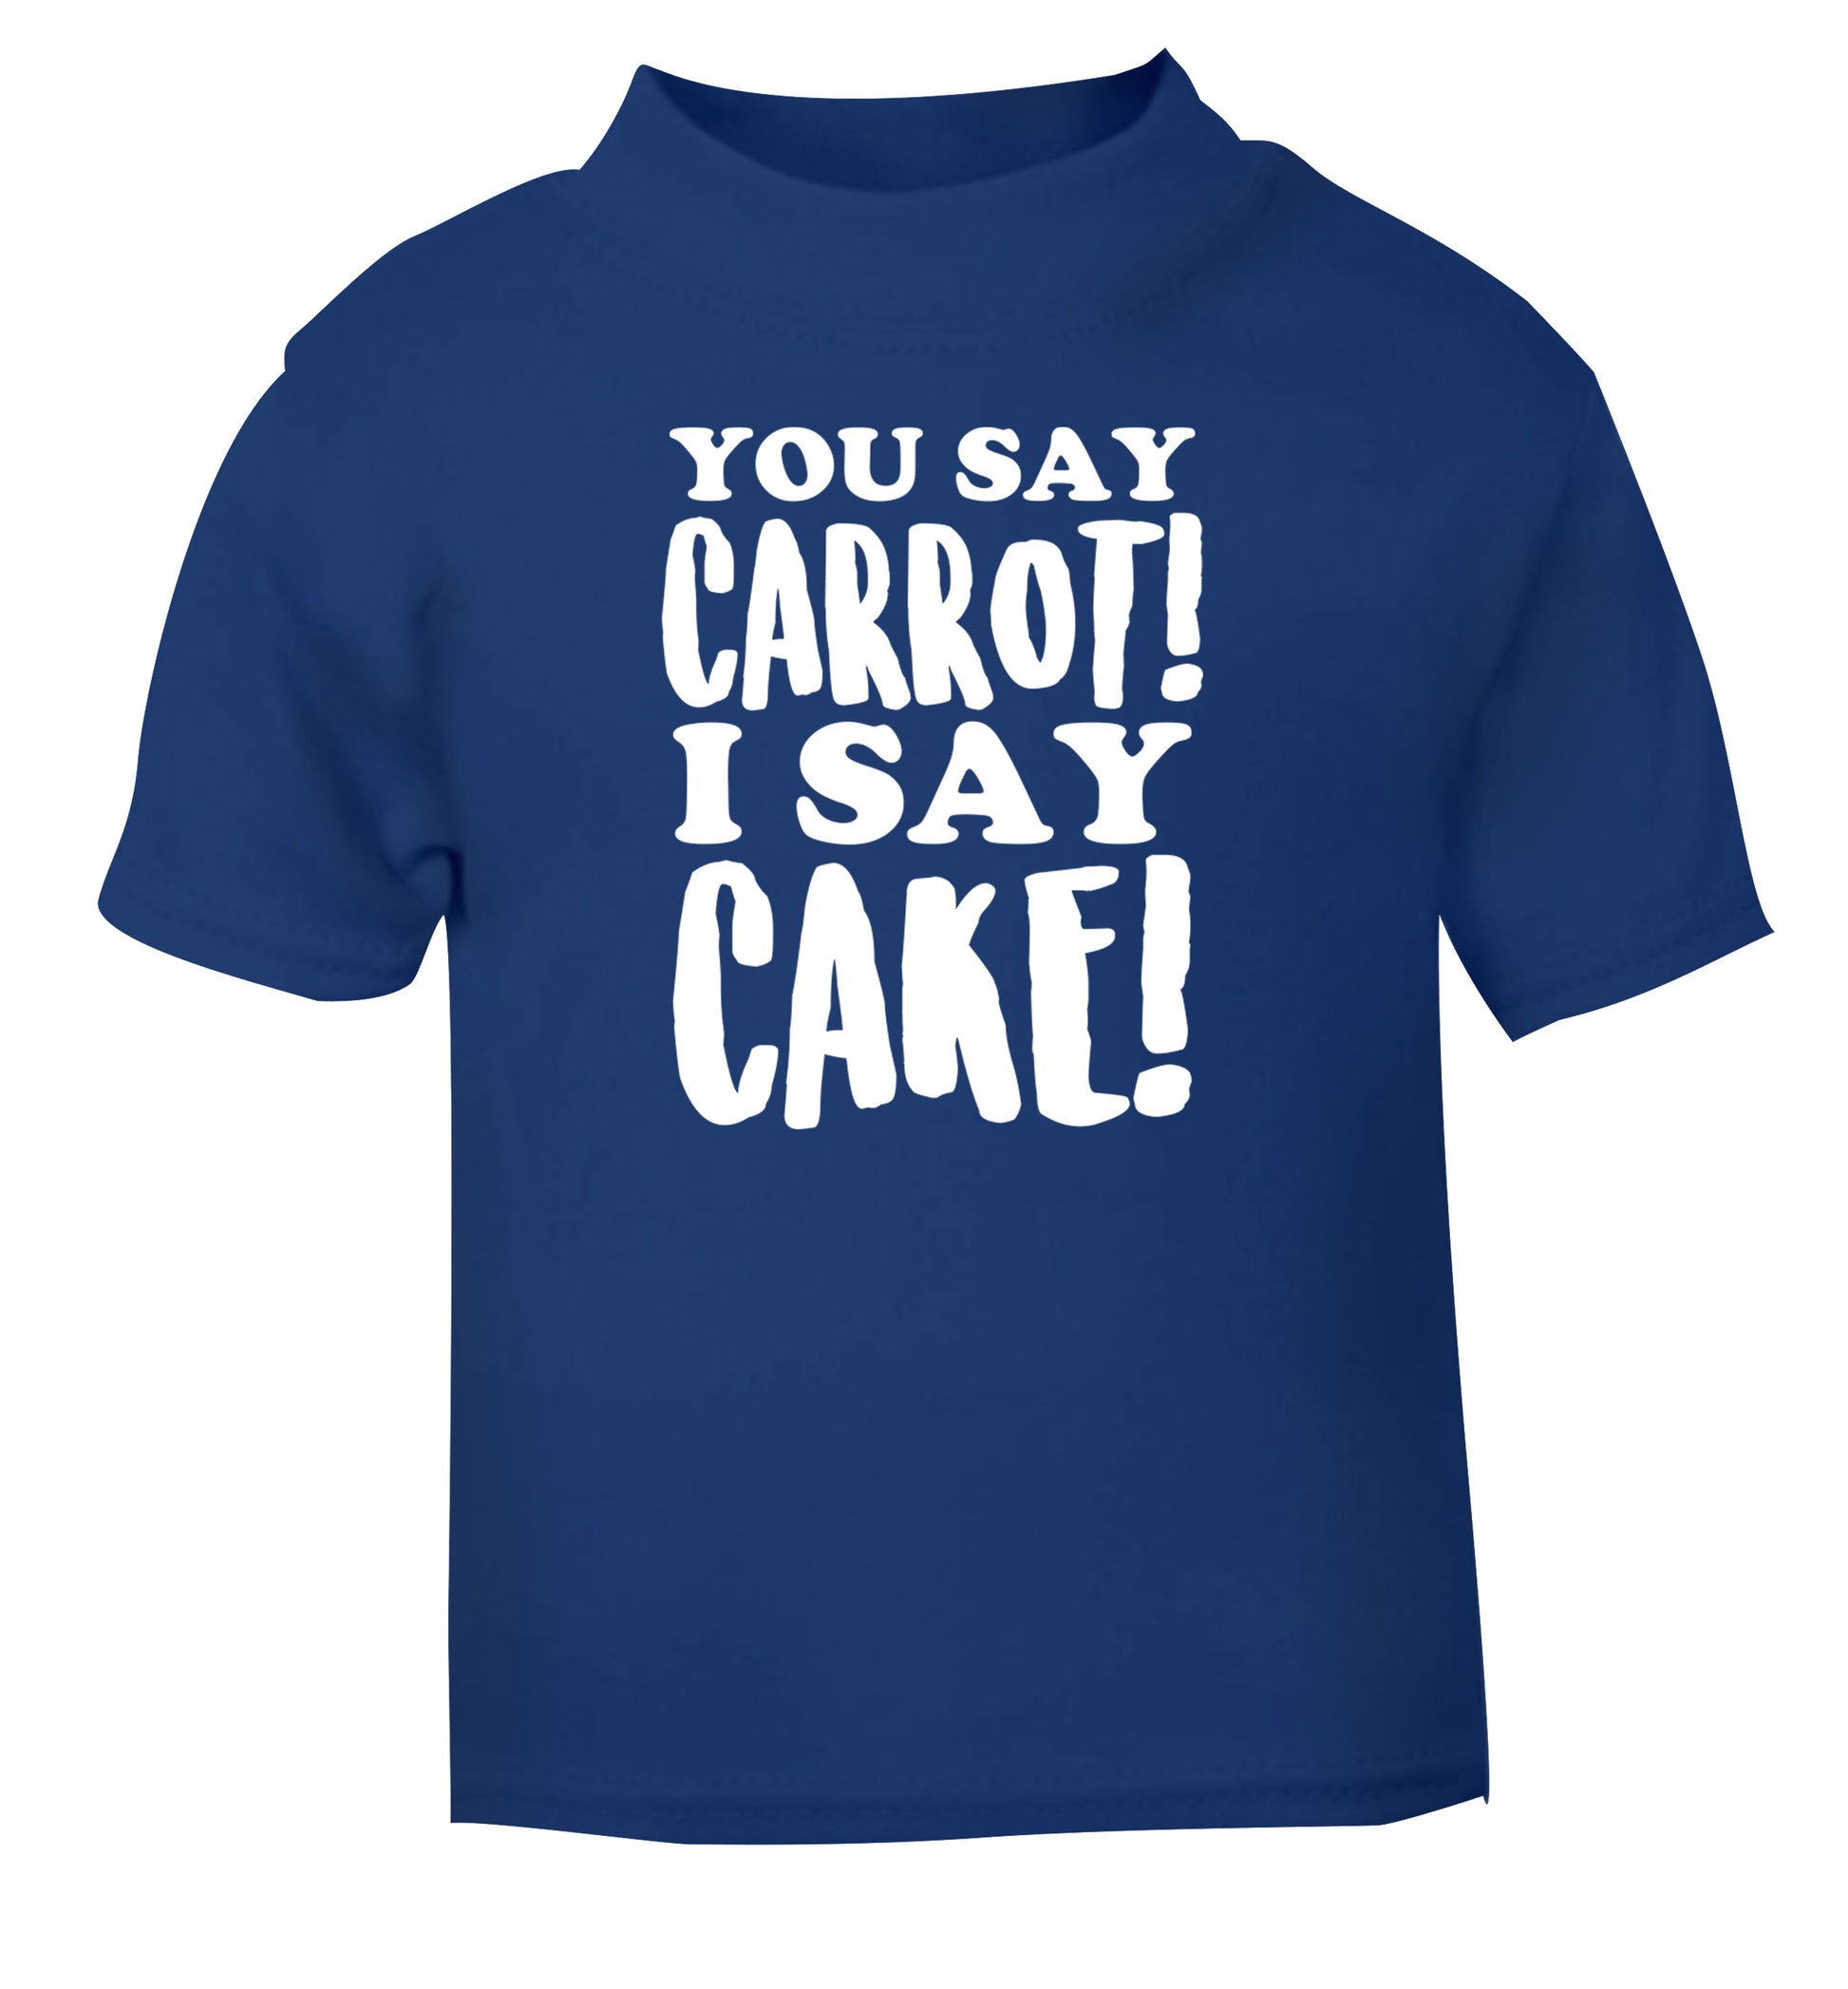 You say carrot I say cake! blue Baby Toddler Tshirt 2 Years